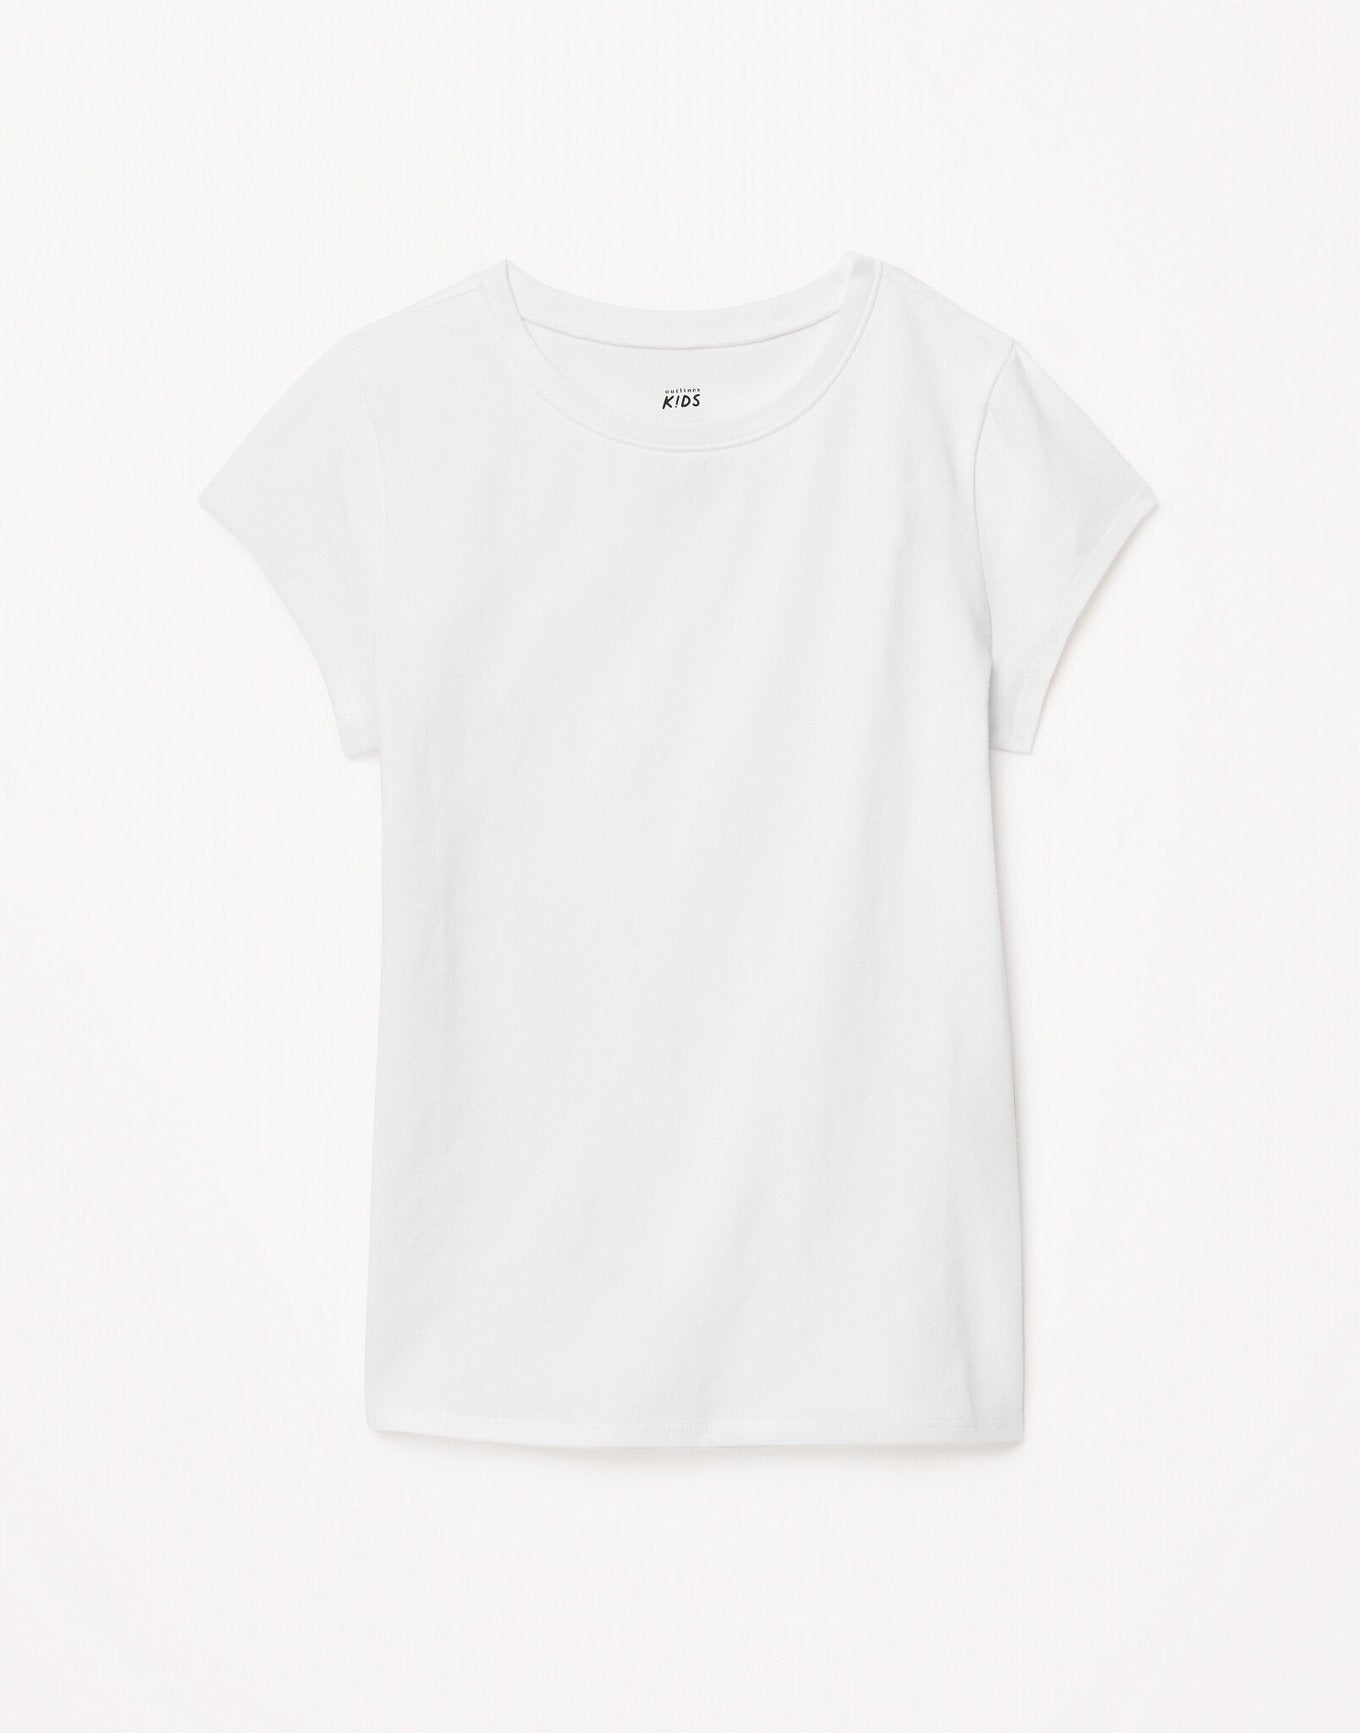 Outlines Kids Adalene in color Bright White and shape t-shirt